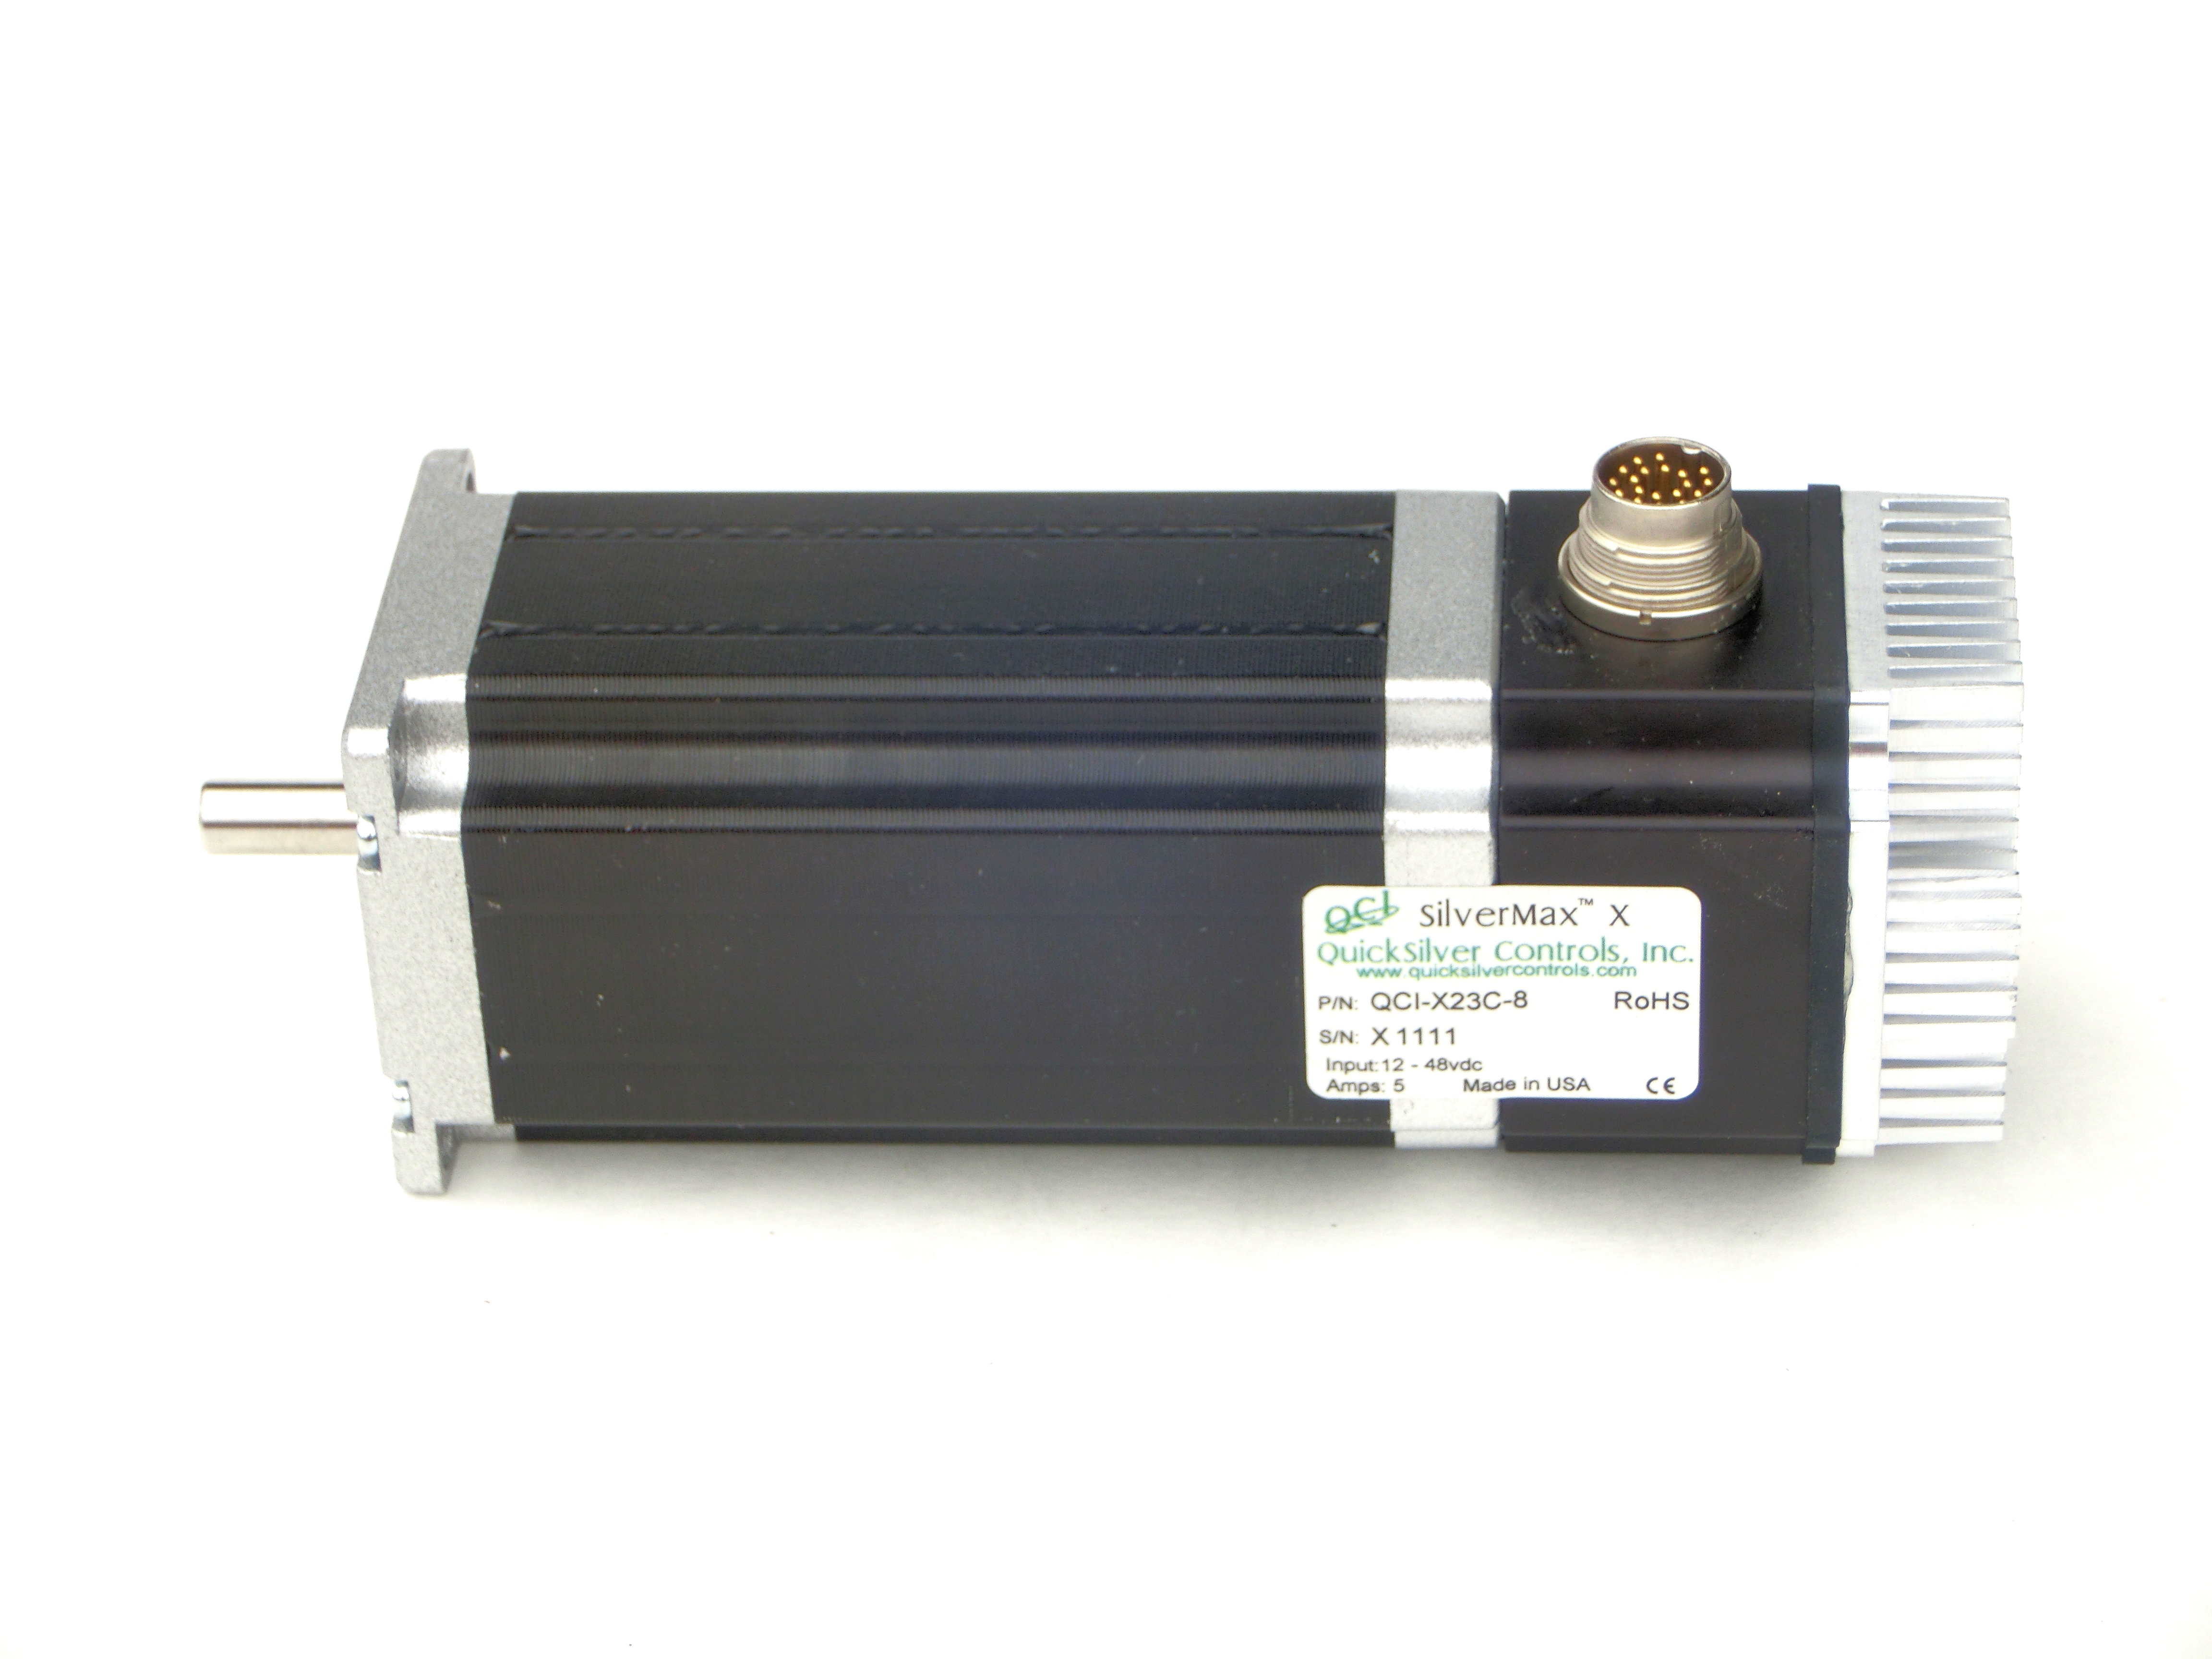 Silvermax X23C-8 servo motor with integrated controller.